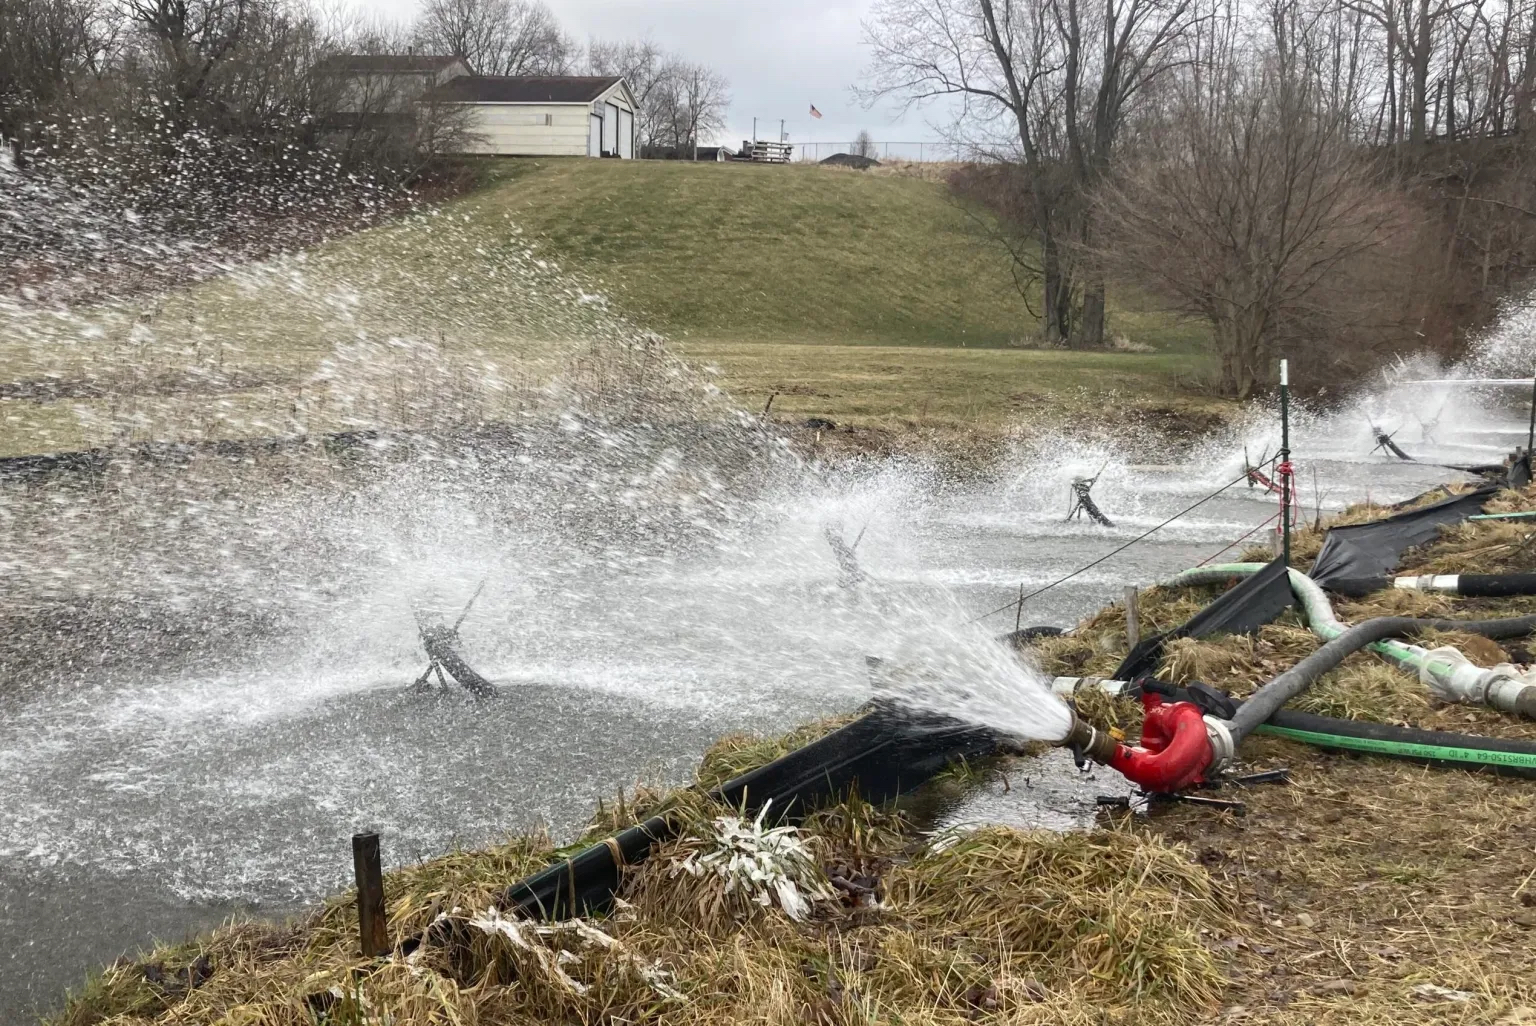 Hoses spraying water over a stream